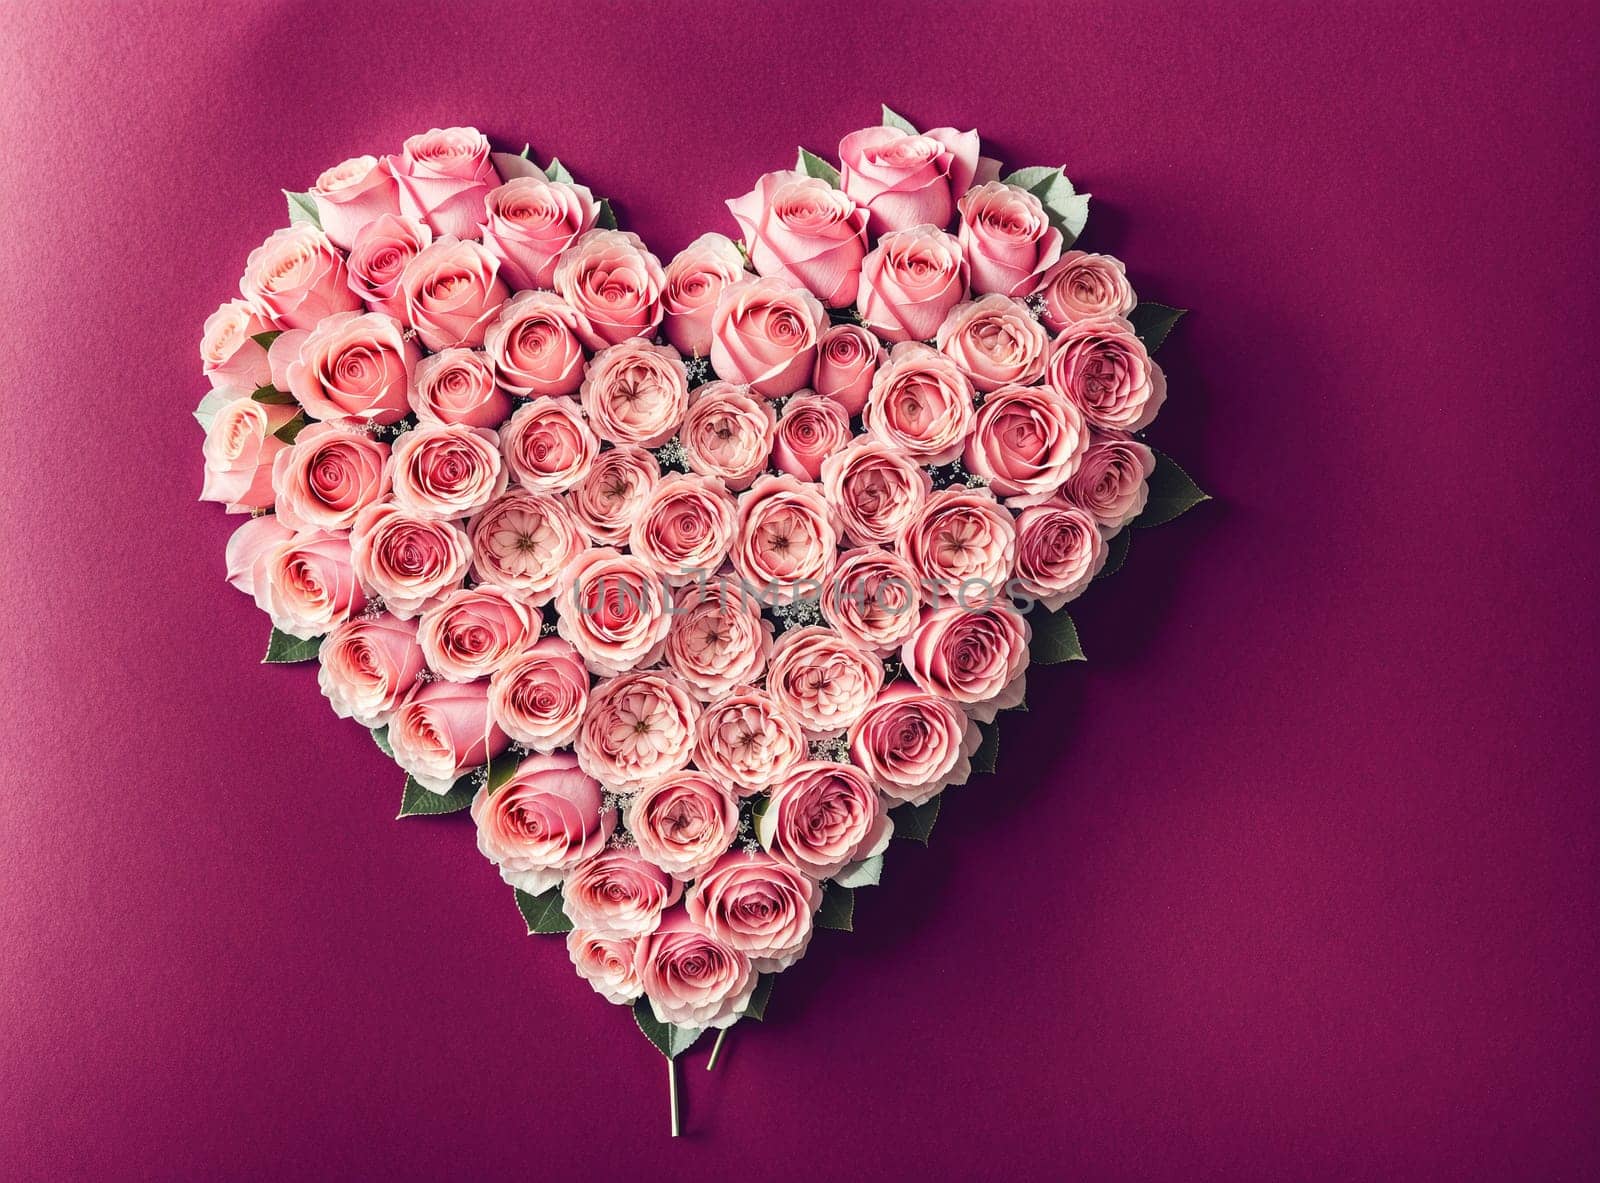 The image is a heart-shaped arrangement of pink roses on a pink background.